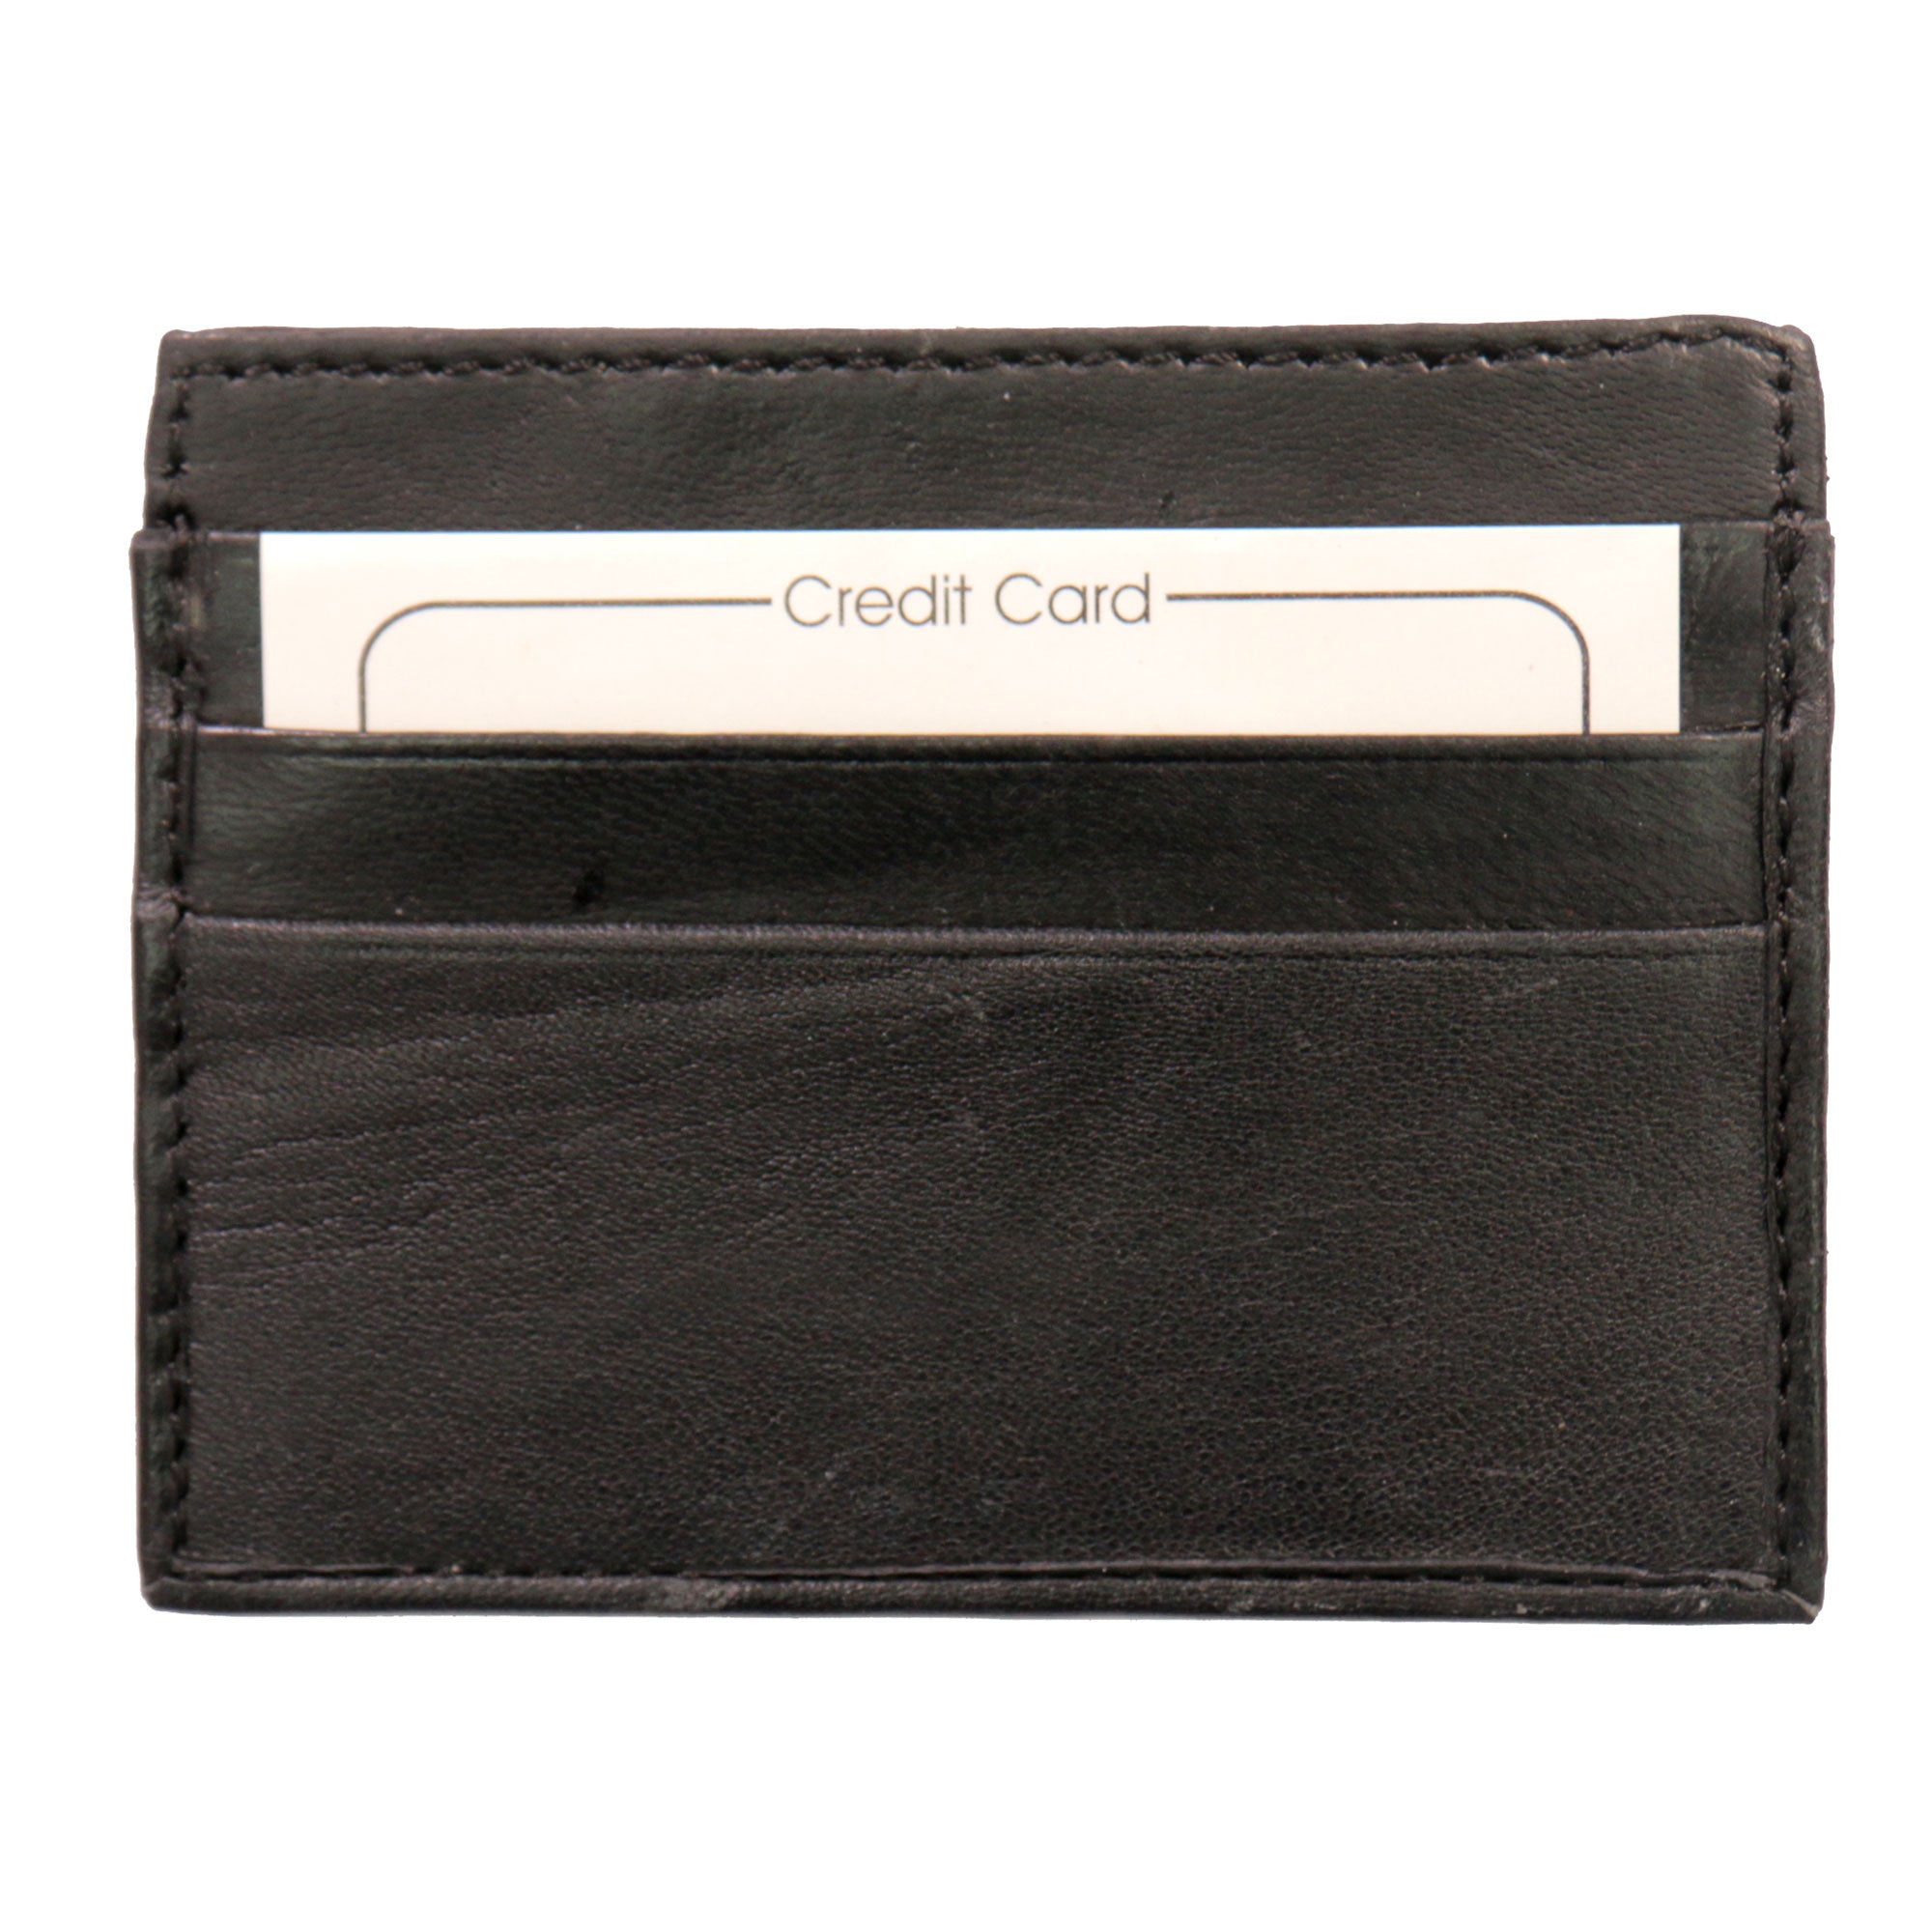 Hot Leathers Black Credit Card Holding Wallet